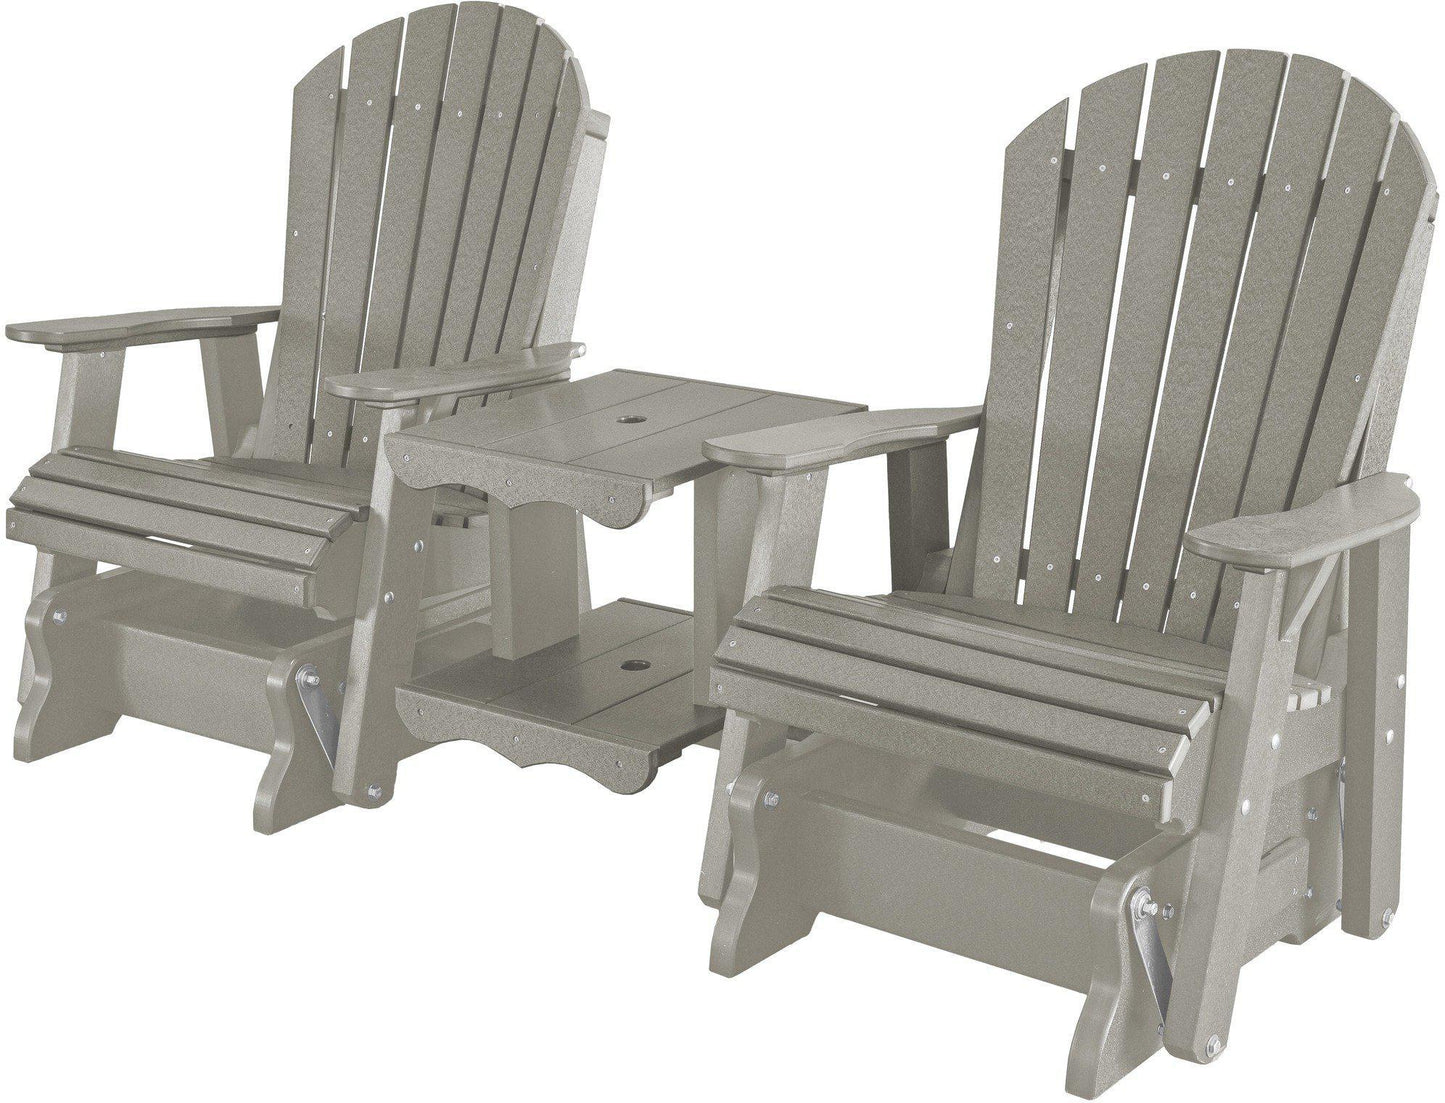 Wildridge Recycled Plastic Heritage Rock-A-Tee Double Seat Adirondack Glider - LEAD TIME TO SHIP 4 WEEKS